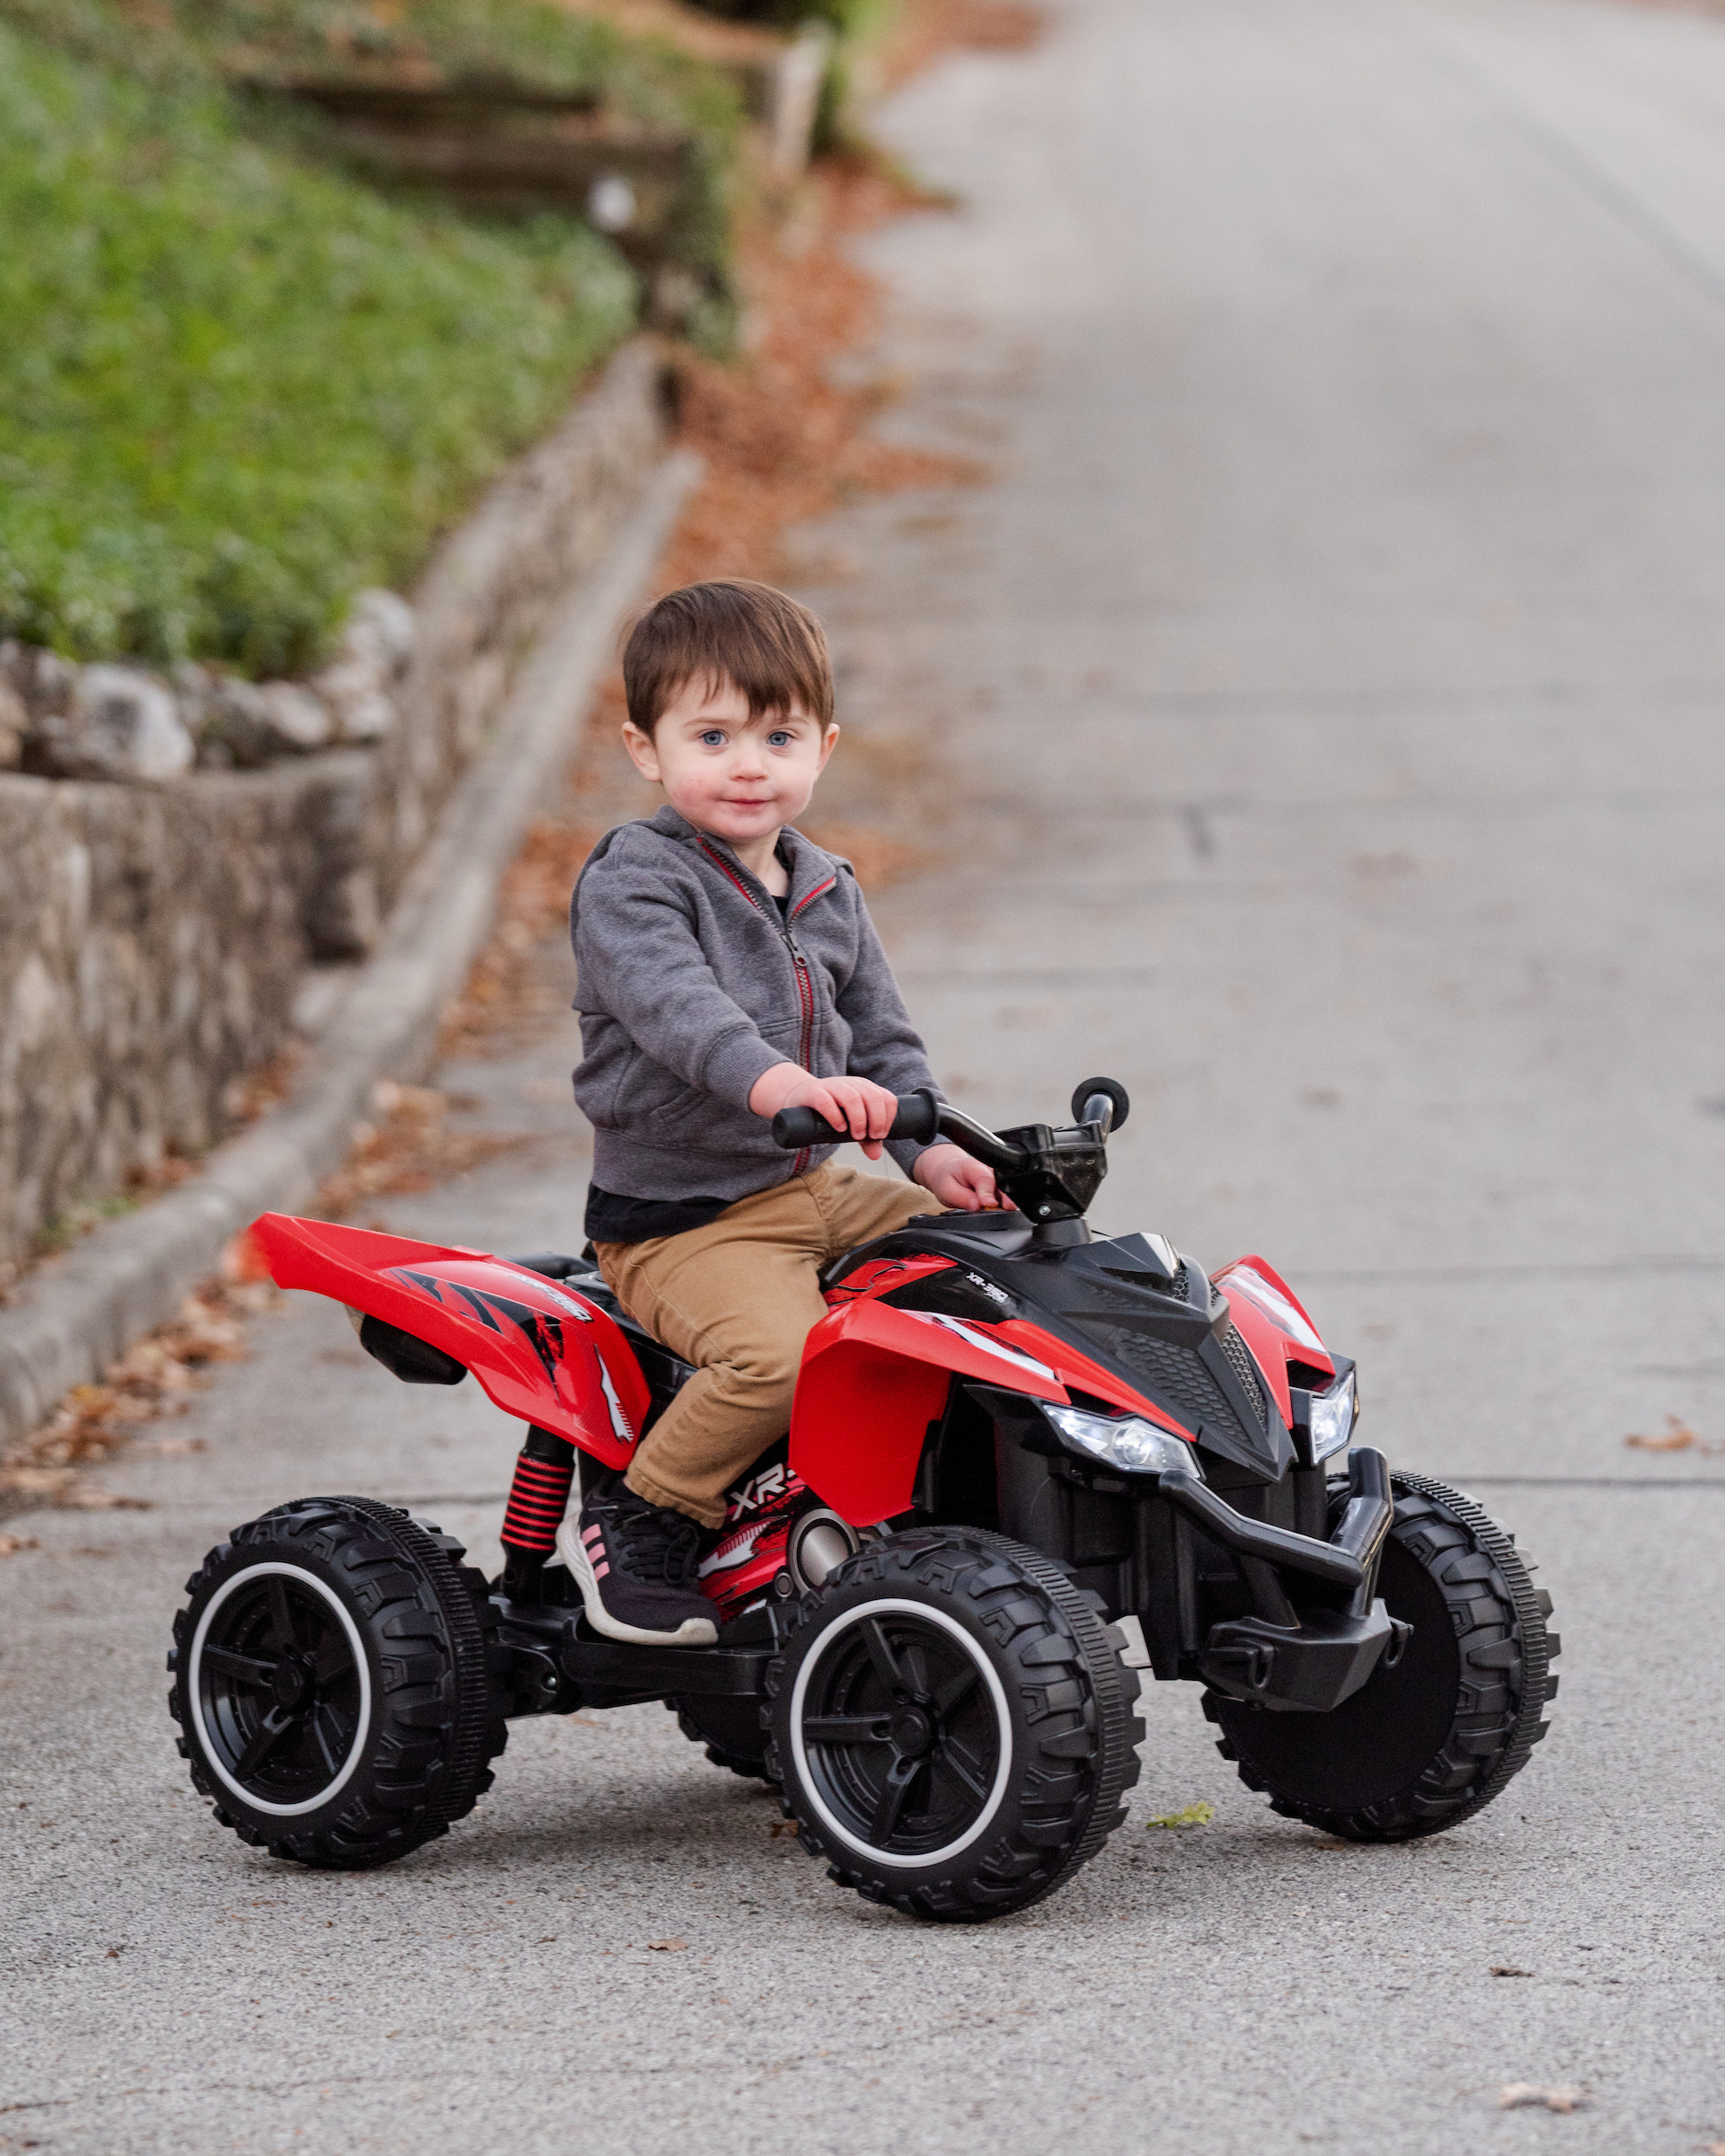 12V XR-350 ATV Powered Ride-on by Action Wheels, Red, for Children, Unisex, Ages 2-4 Years Old - image 5 of 26